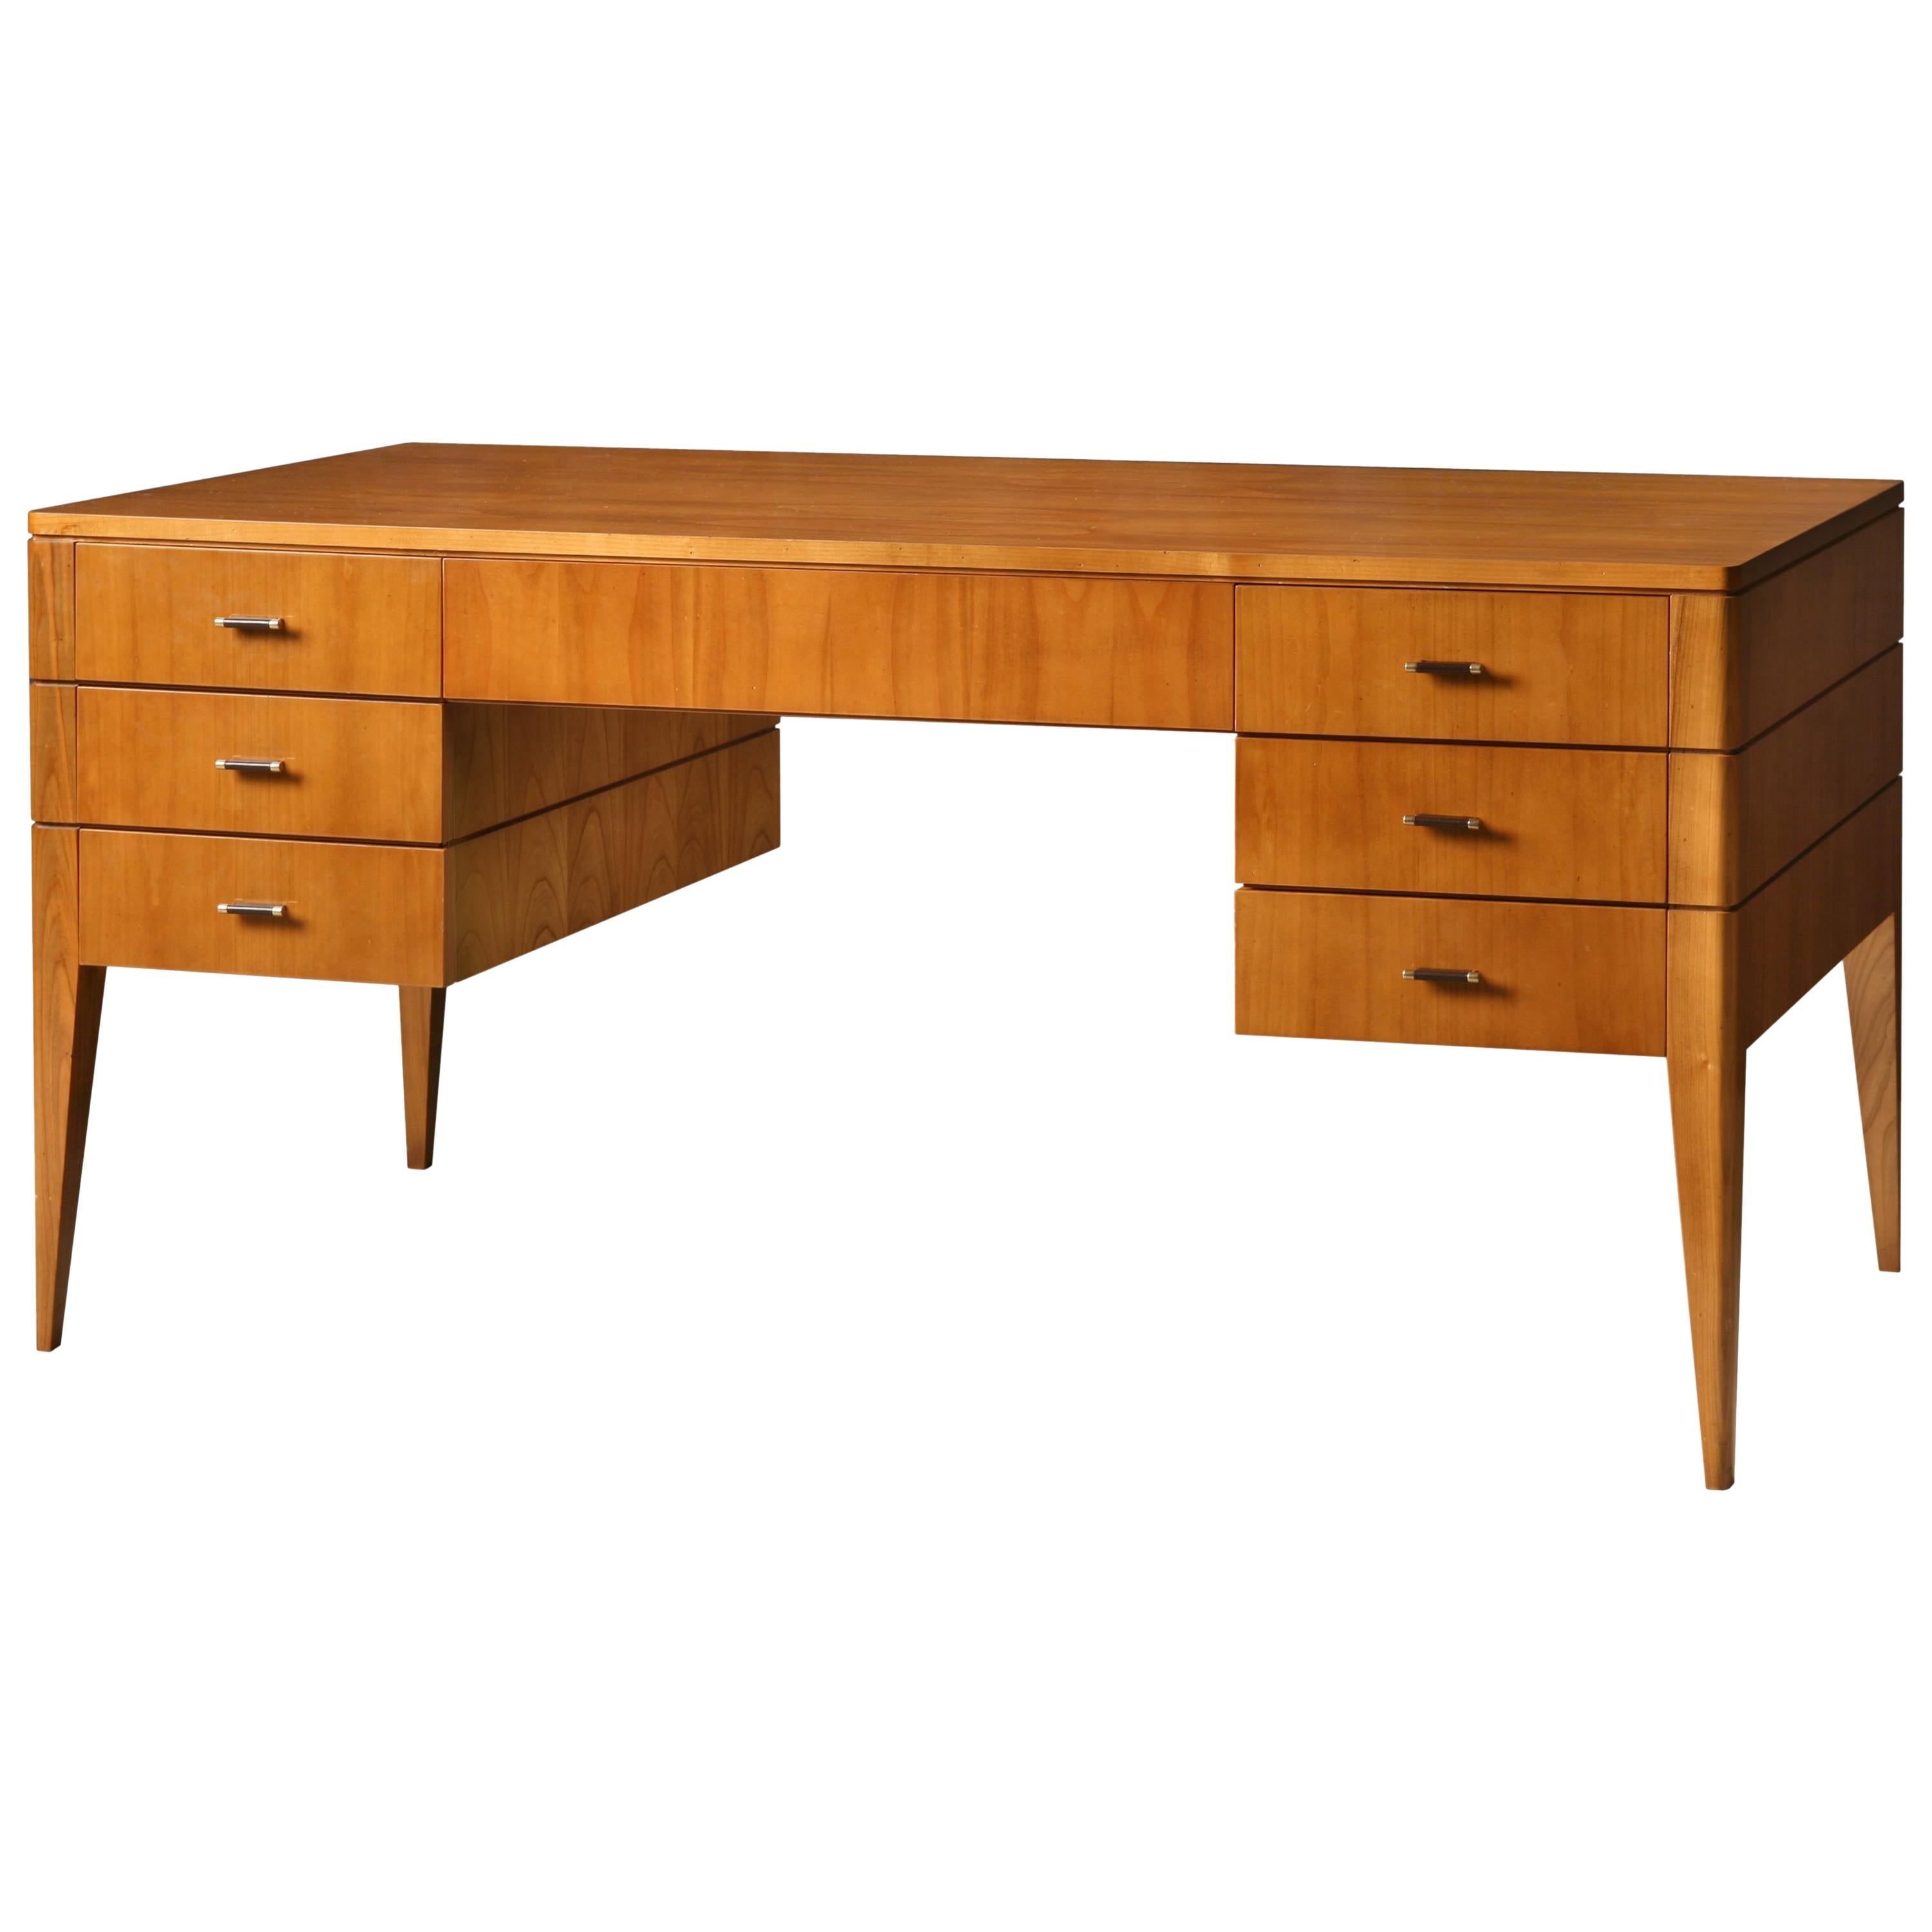 '900 Style Wooden Desk in Cherrywood by Morelato